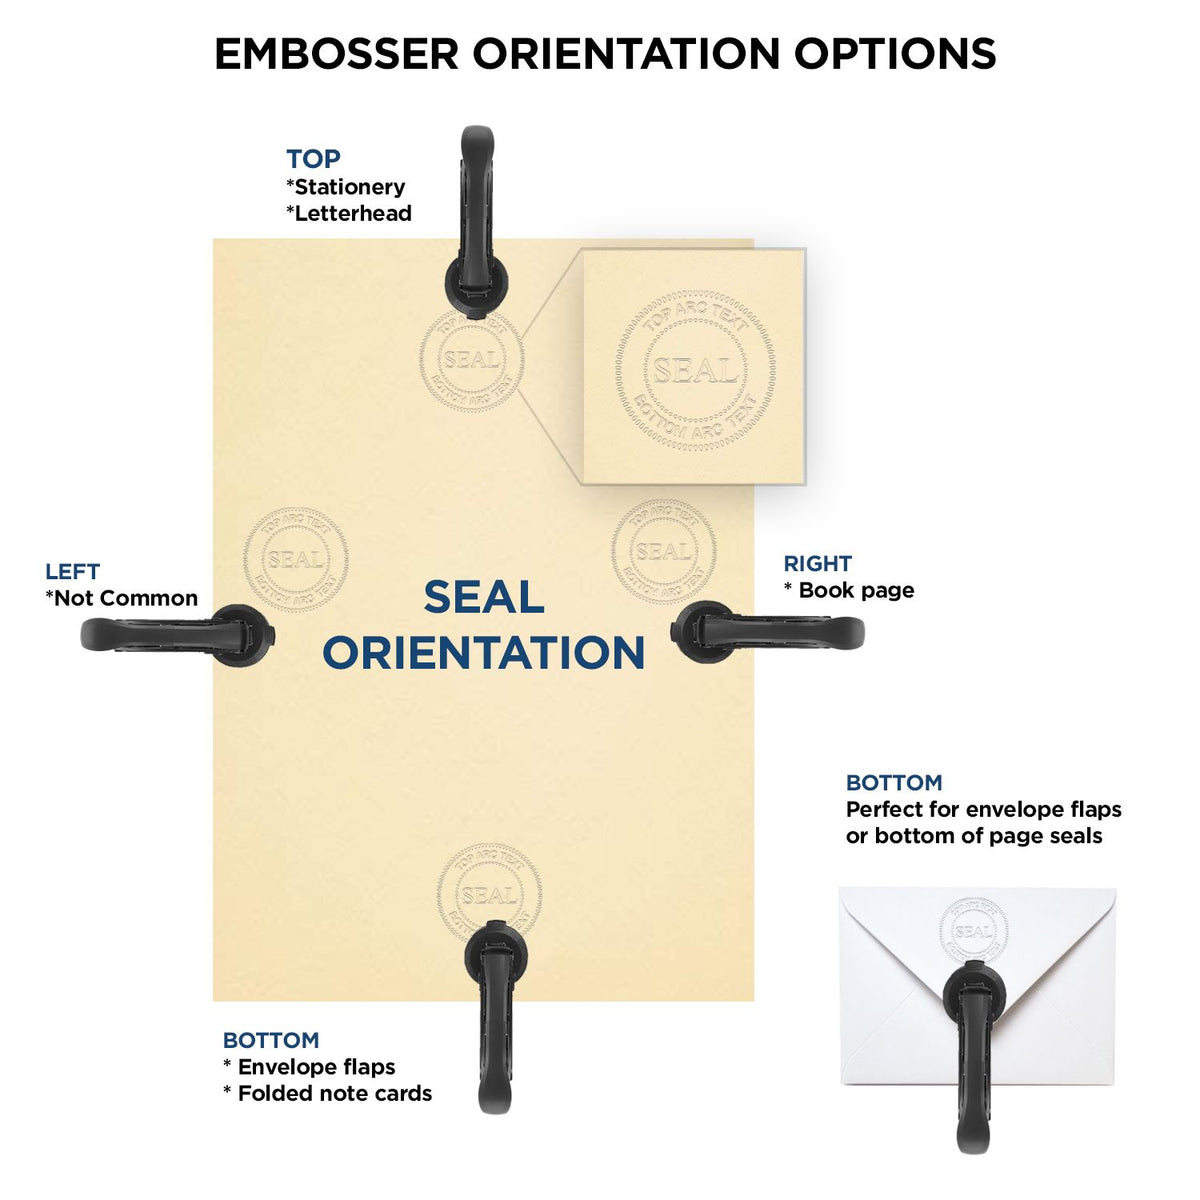 An infographic for the Handheld Arkansas Professional Engineer Embosser showing embosser orientation, this is showing examples of a top, bottom, right and left insert.